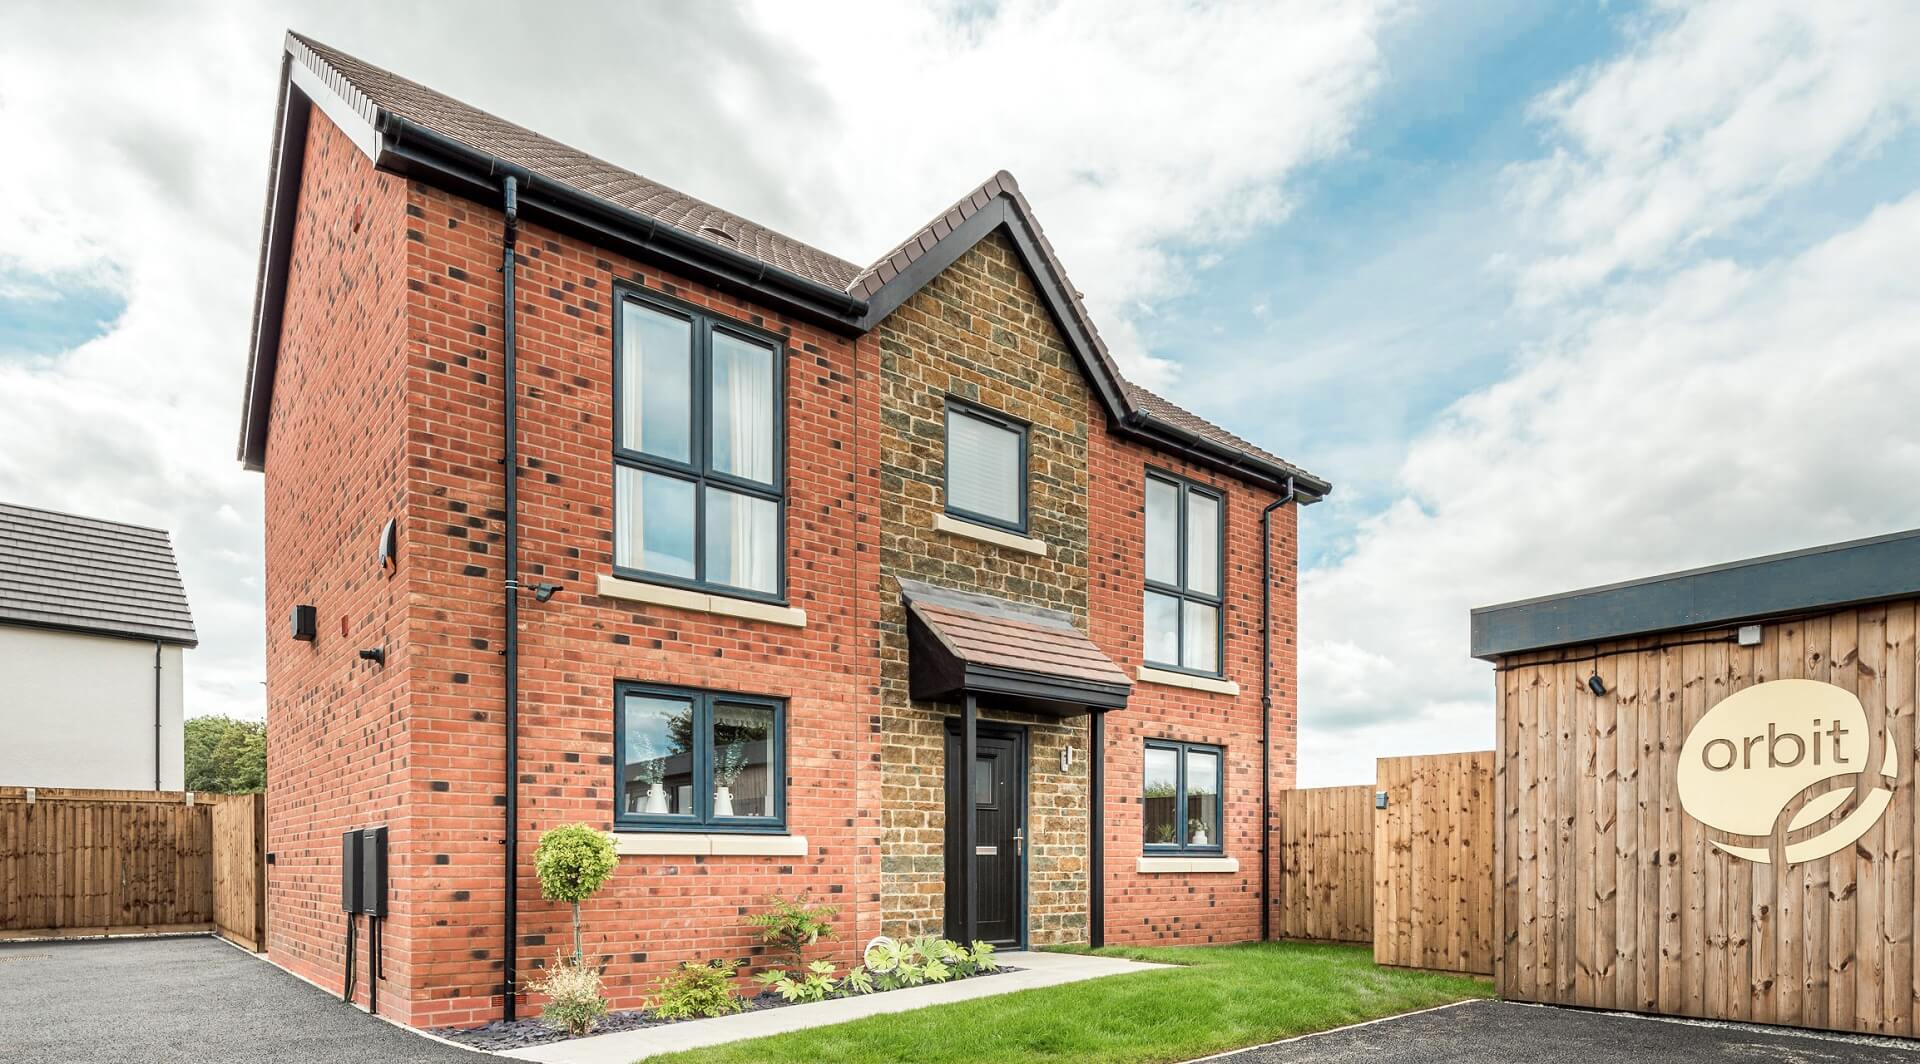 Orbit Homes To Deliver 100 Affordable Properties At Brand New Warwickshire Development